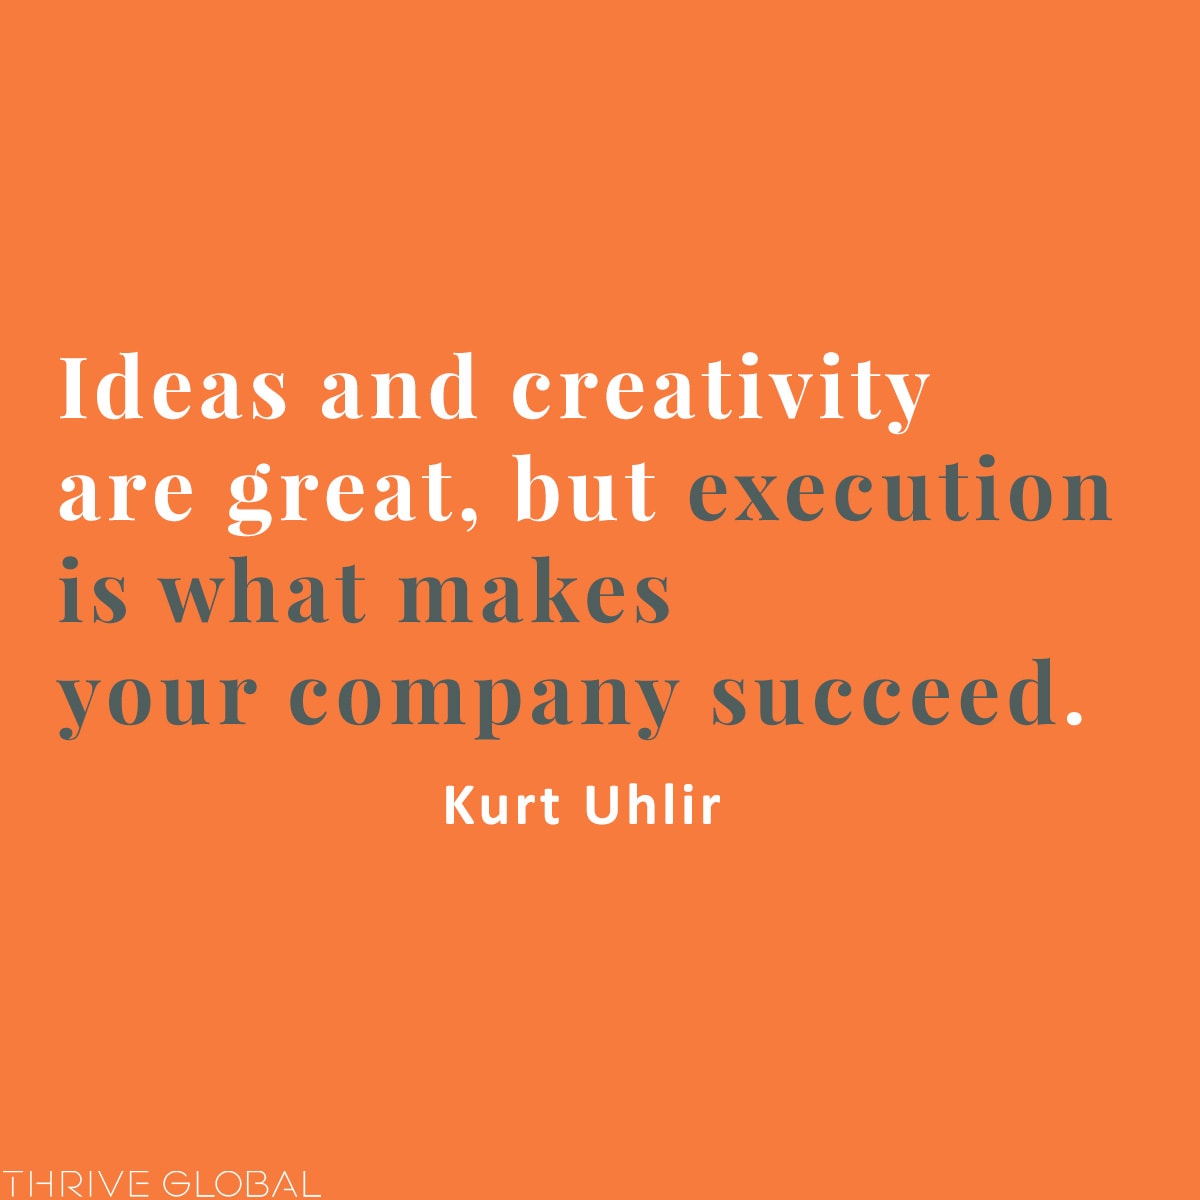 Ideas and creativity are great, but execution is what makes your company succeed.